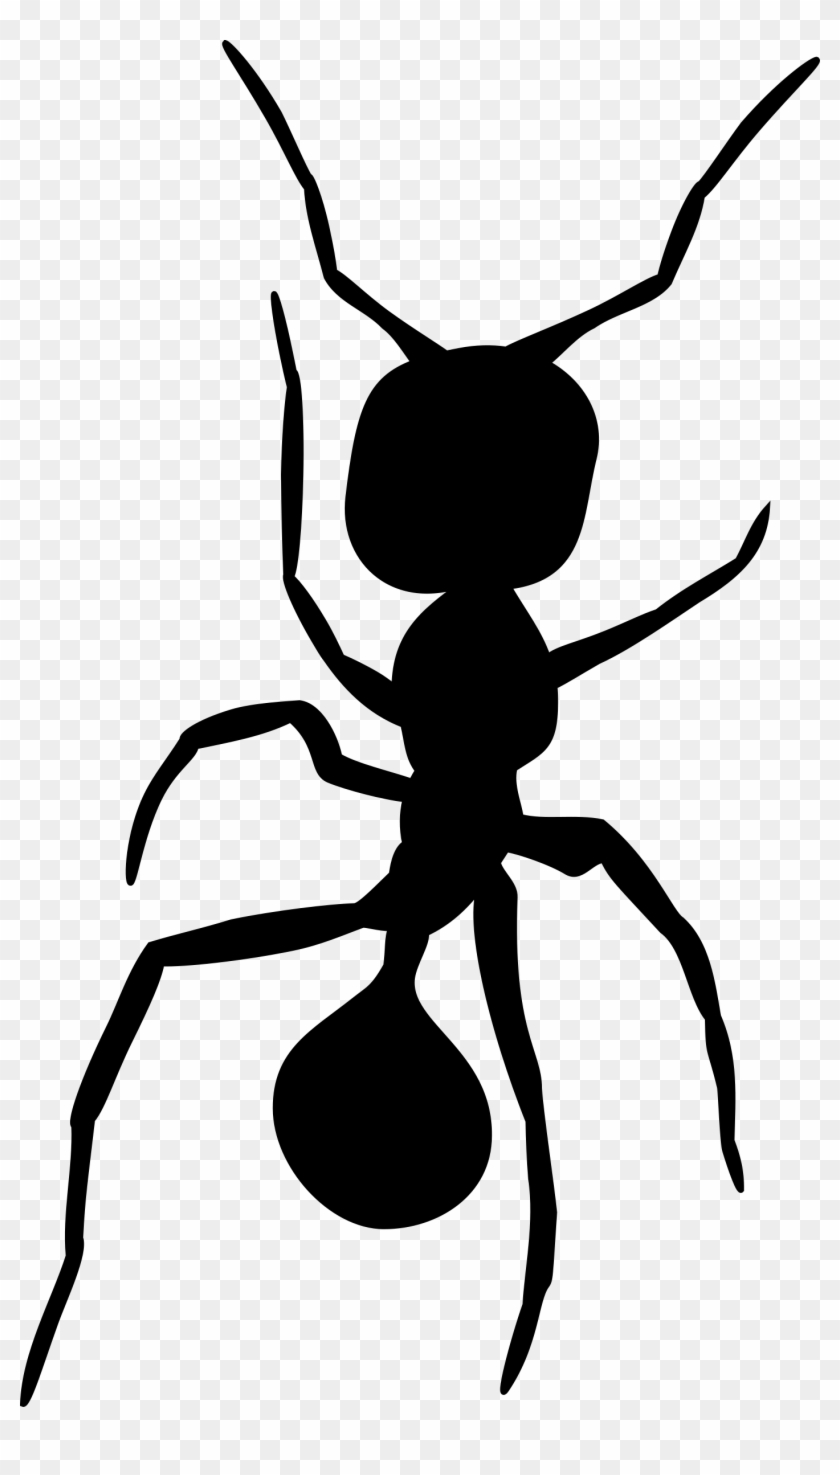 Ant Silhouette 2 By Tulvur - Ant Silhouette Png #161308